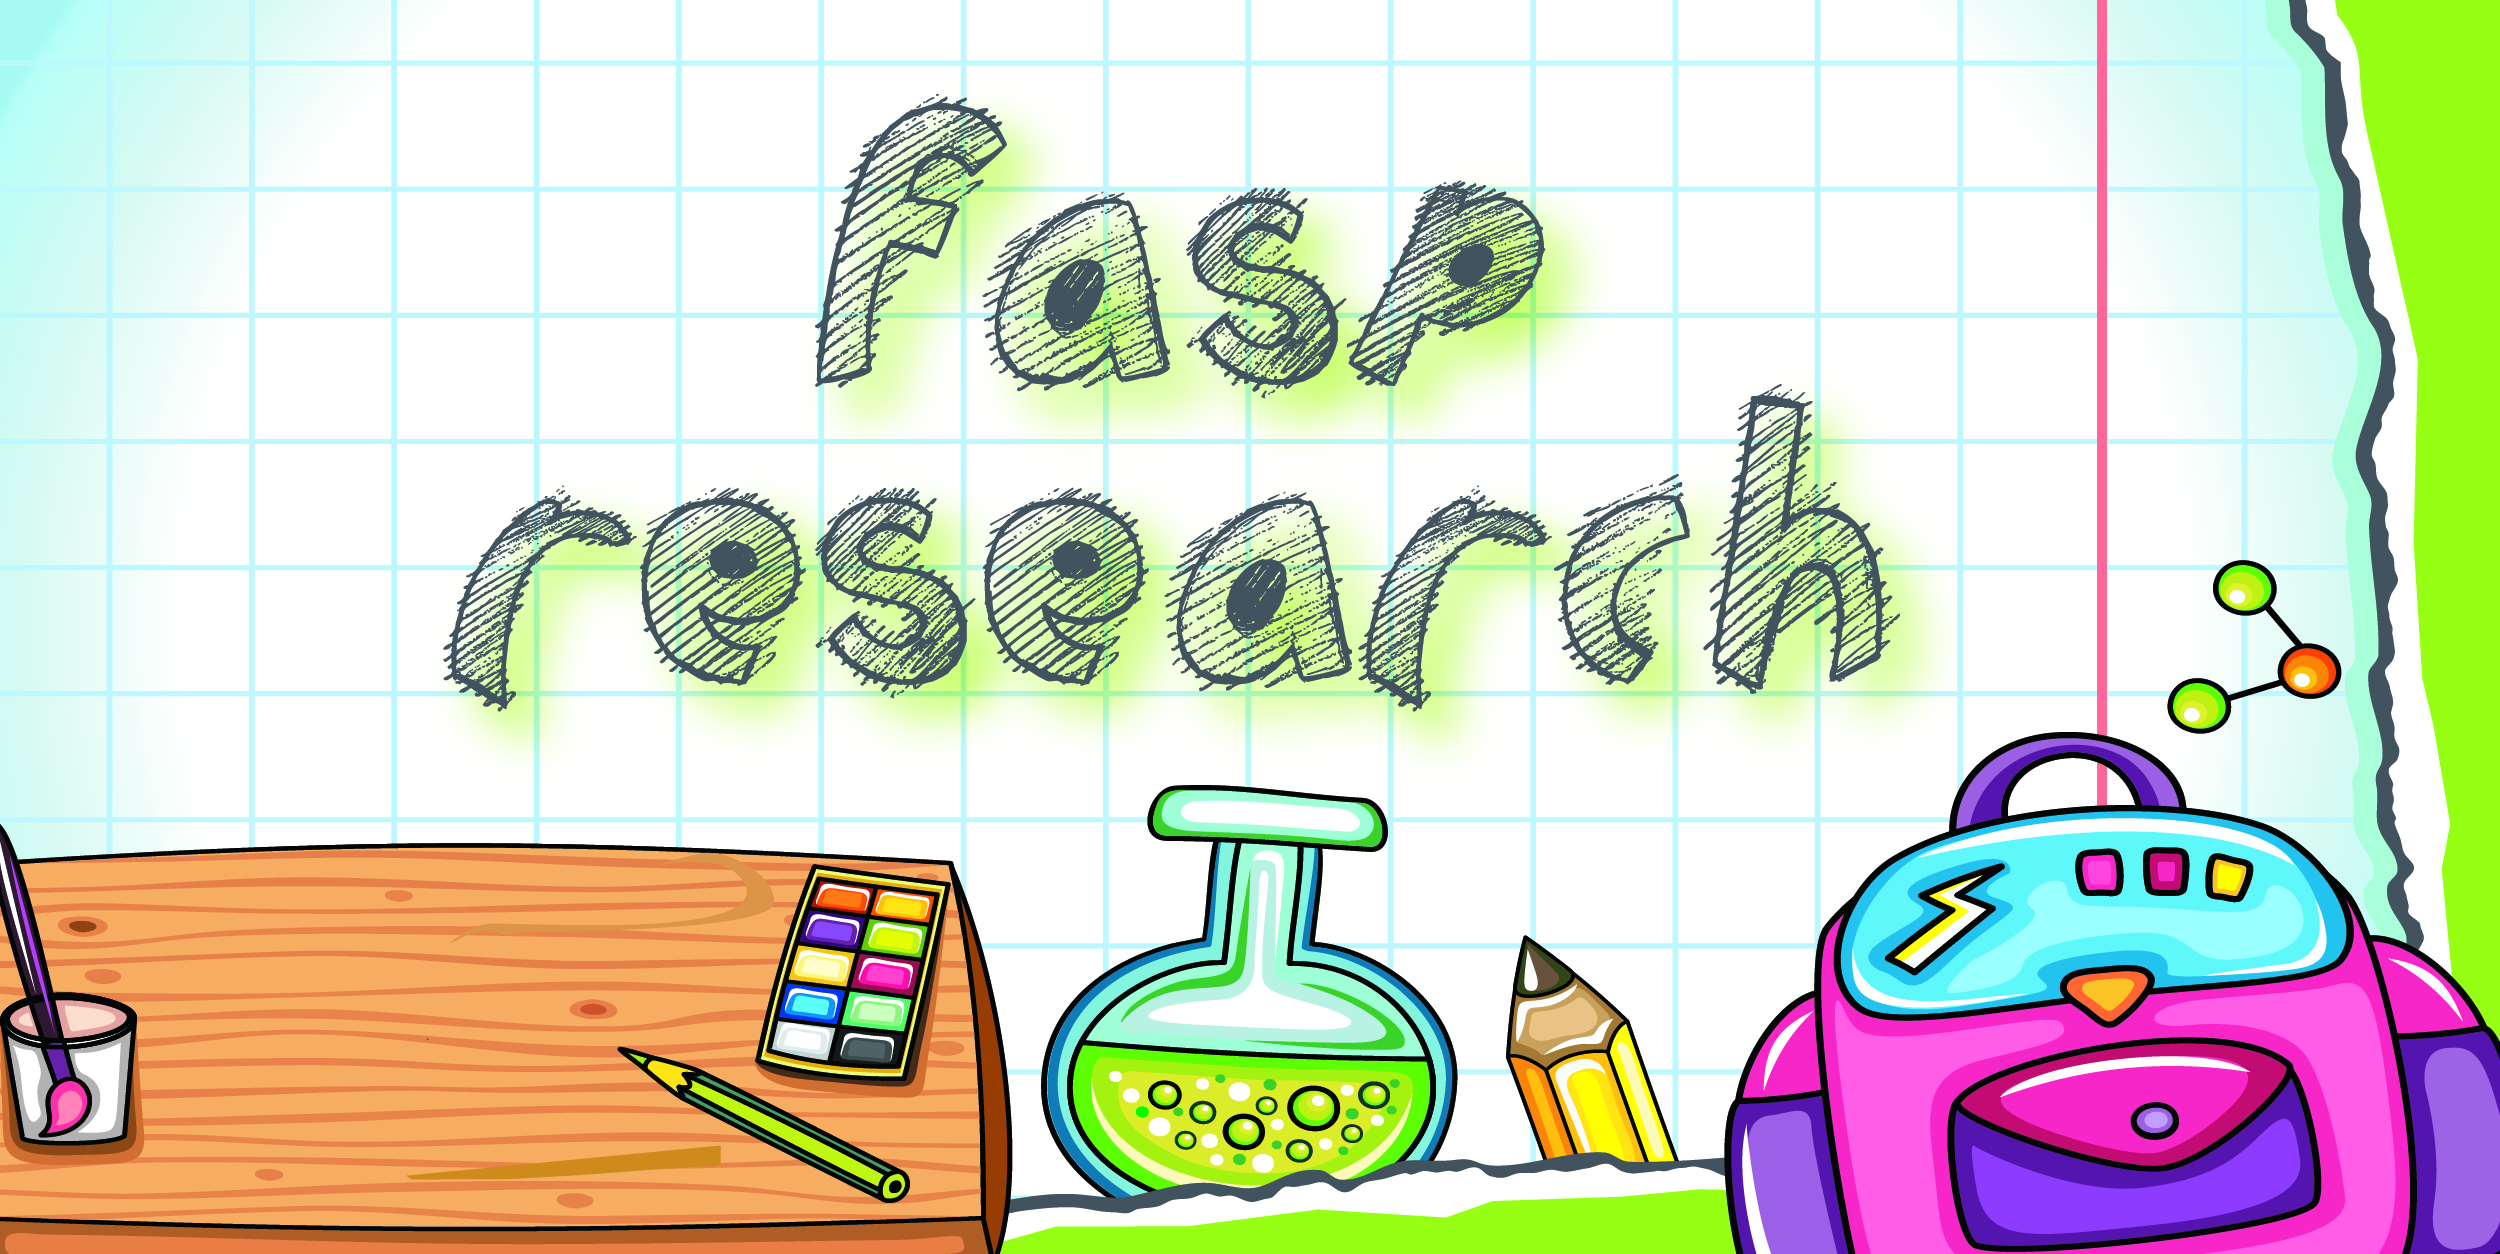 FASP Research